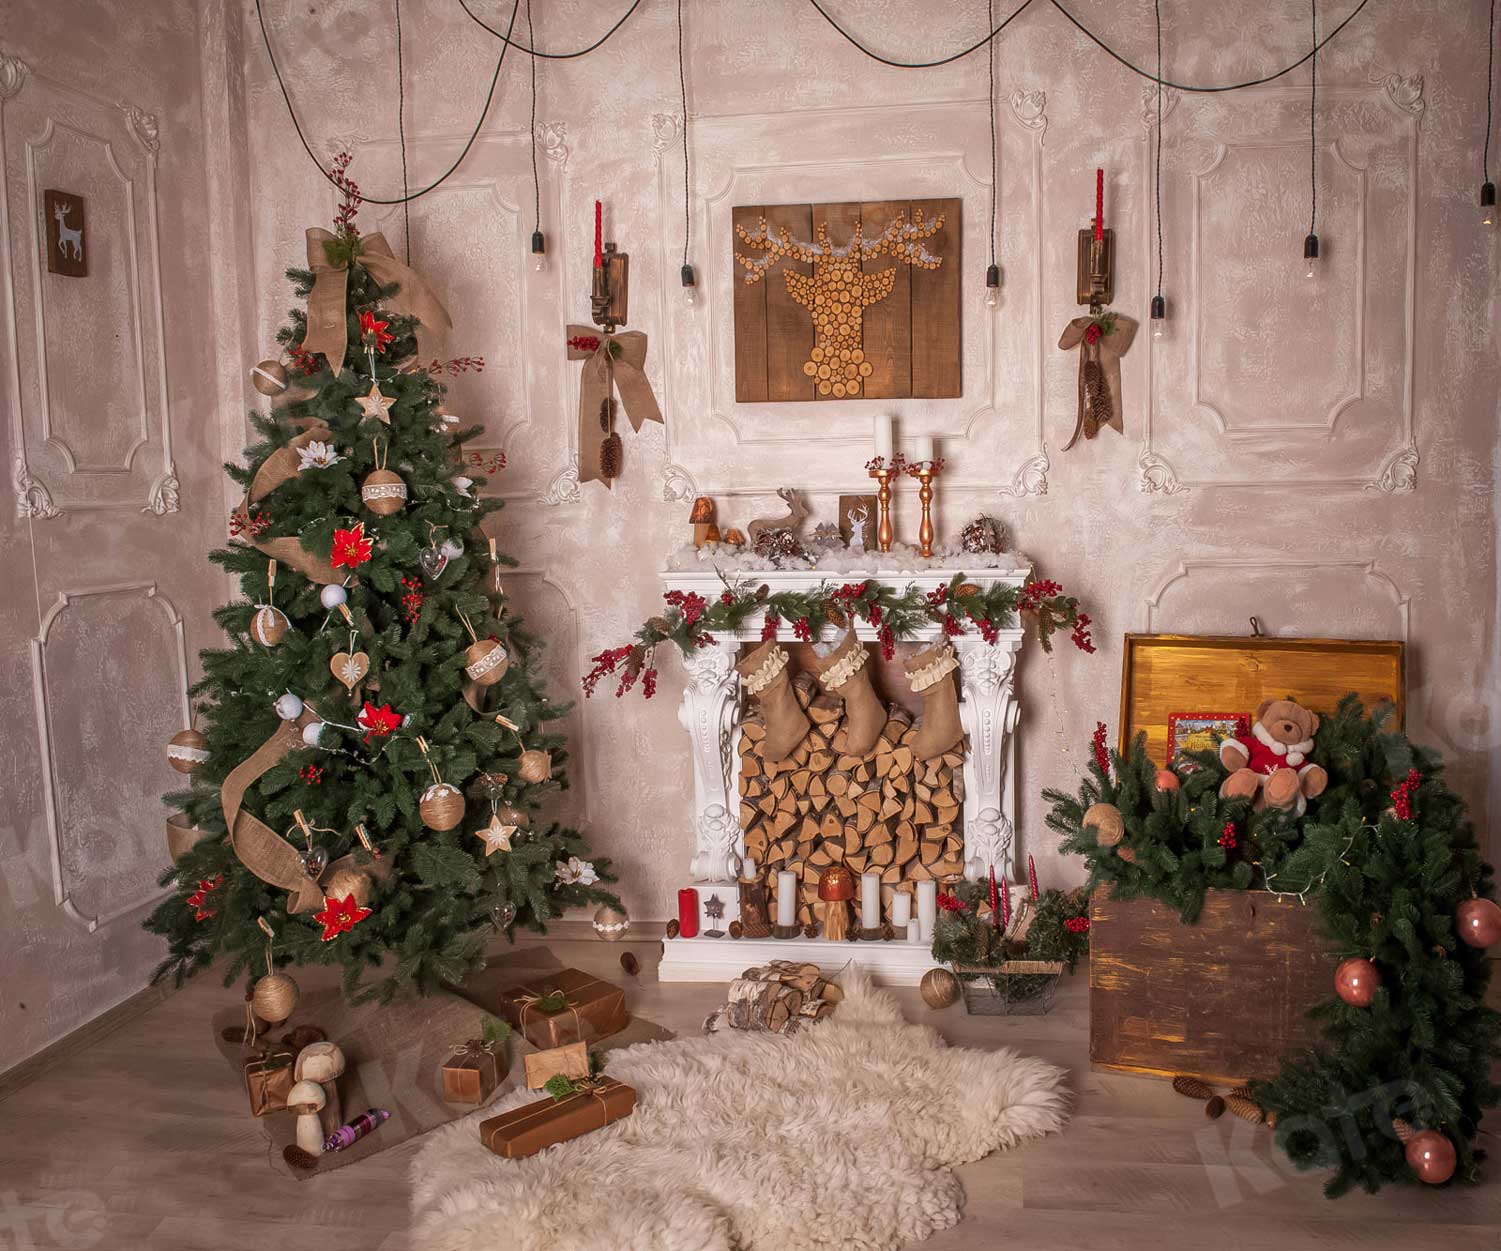 Kate Christmas Tree Fireplace Room Background for Family Photography - Kate backdrop UK